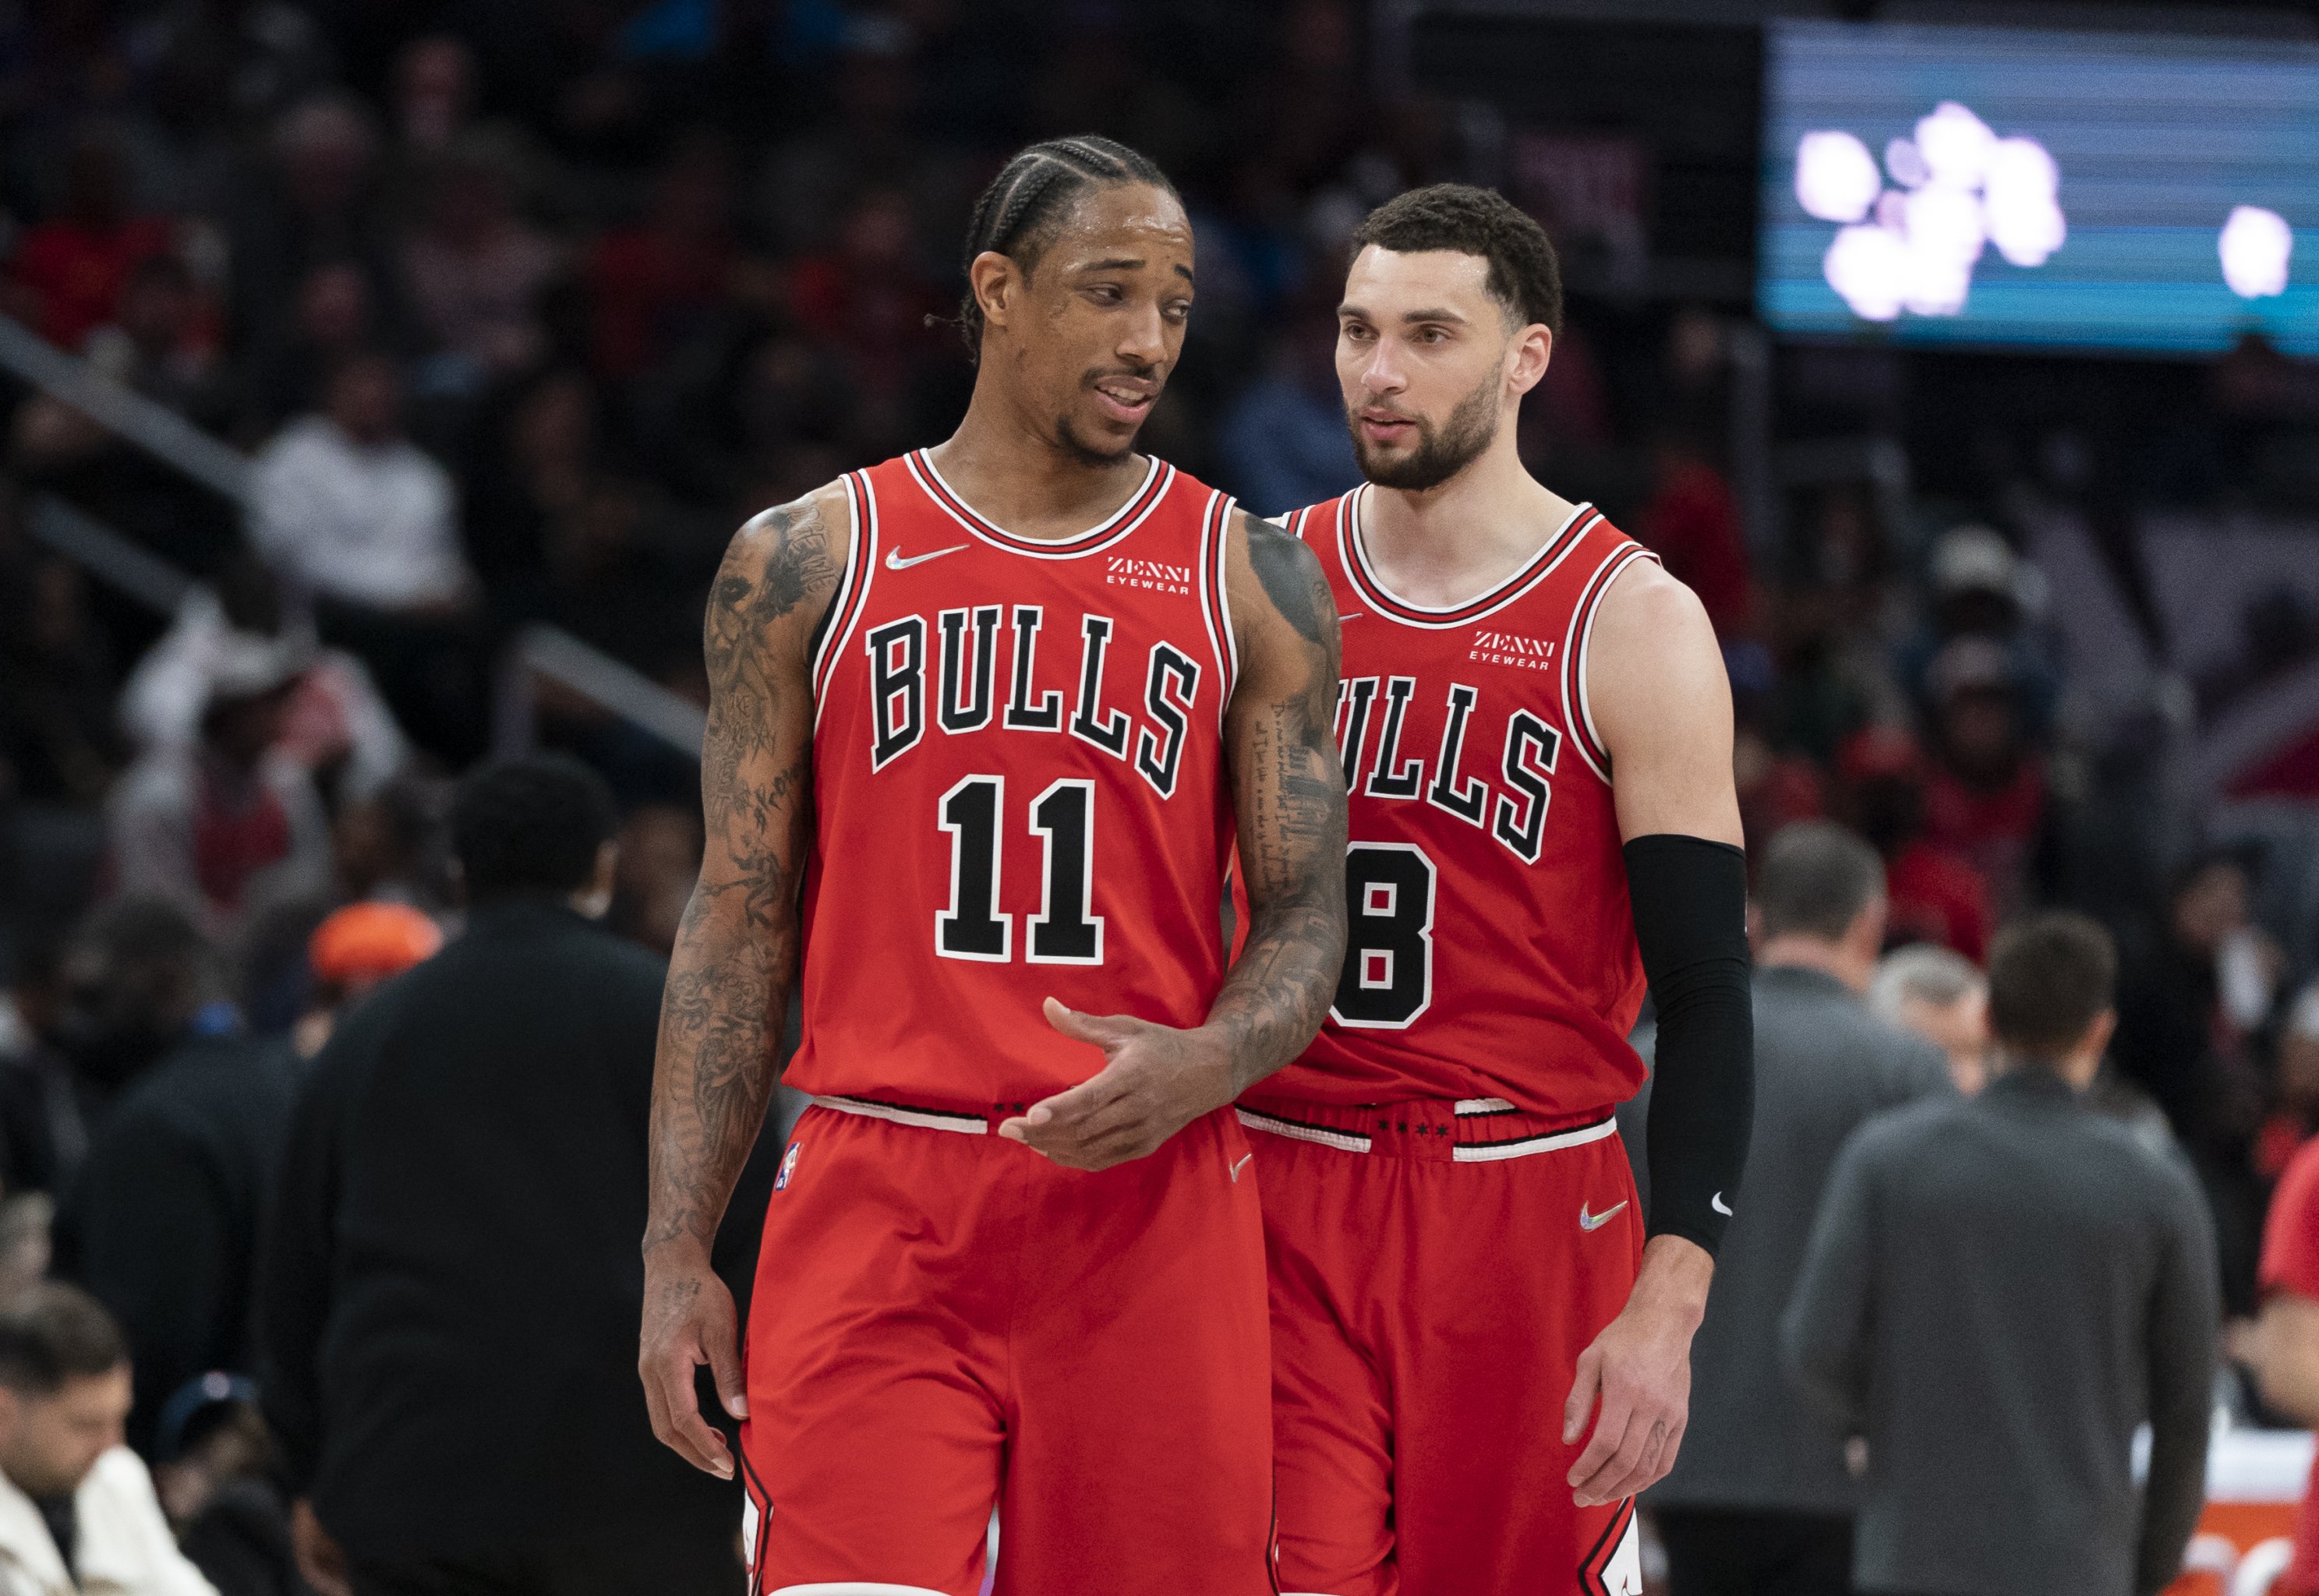 3 shooters the Chicago Bulls could target in free agency